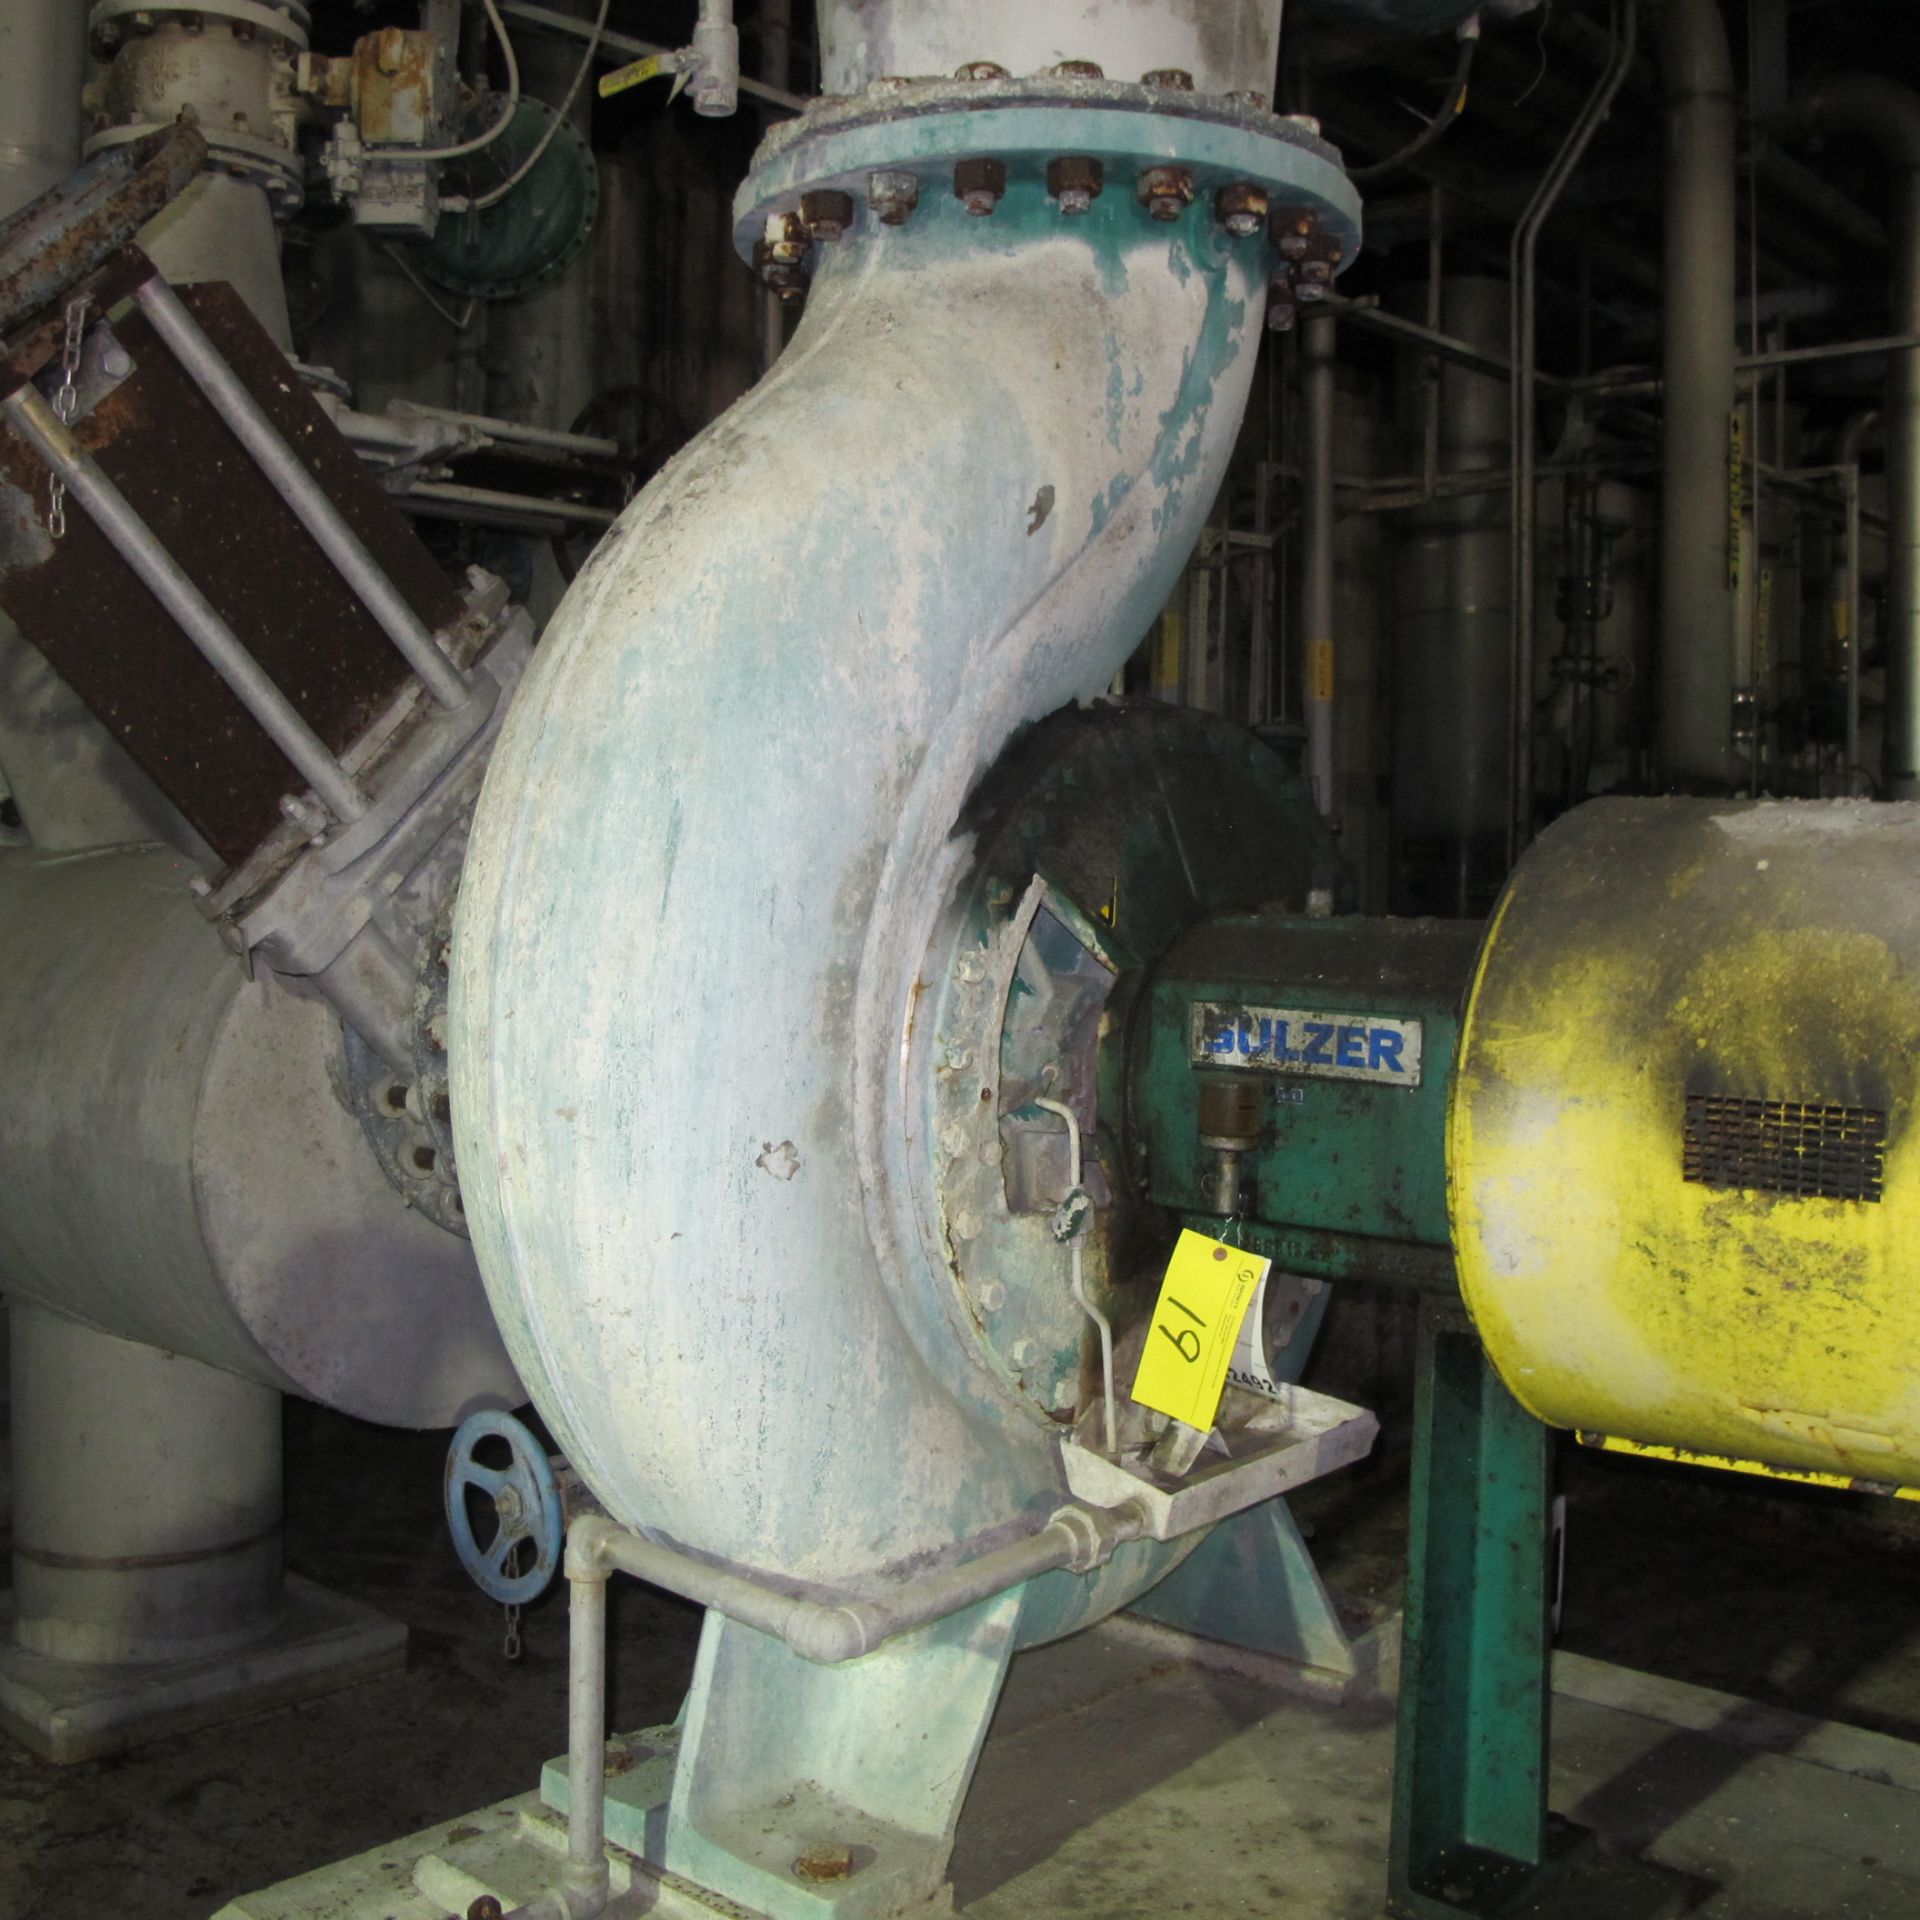 SULZER APT 61-20 20X20X28 PUMP, 14,711 GPM AT 100 FT/HEAD, A-LINE PRIMARY FLOTATION CELL FEED (